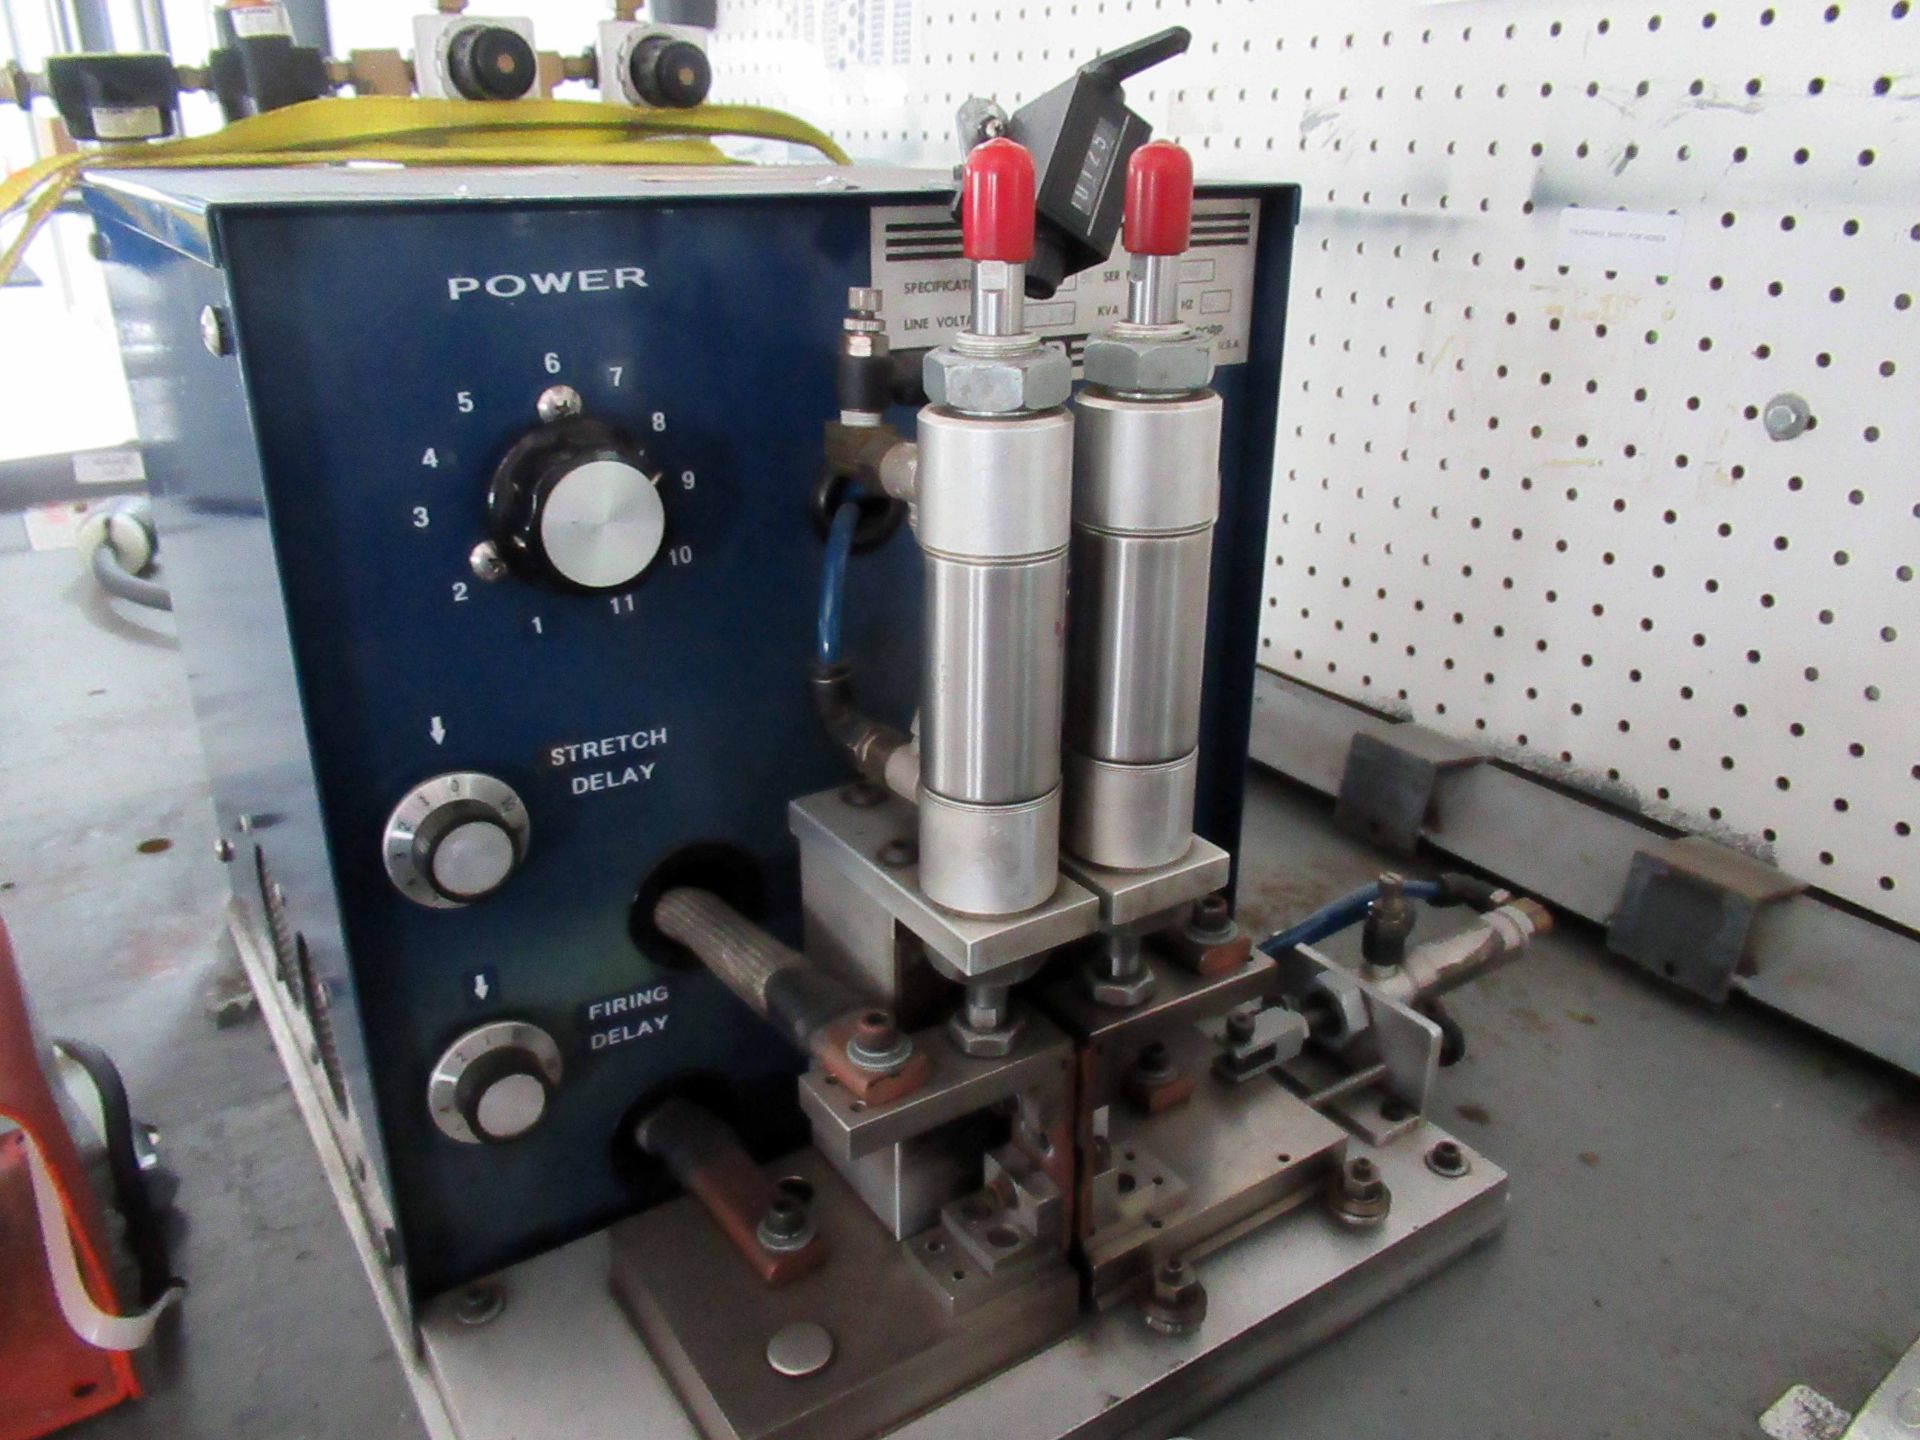 HOSE FLASH CUTTER STATION, EWALD FLASH CUTTER SS48CS/5 TUBE, Olympia 1410 wire length meter, 1 HP - Image 3 of 8